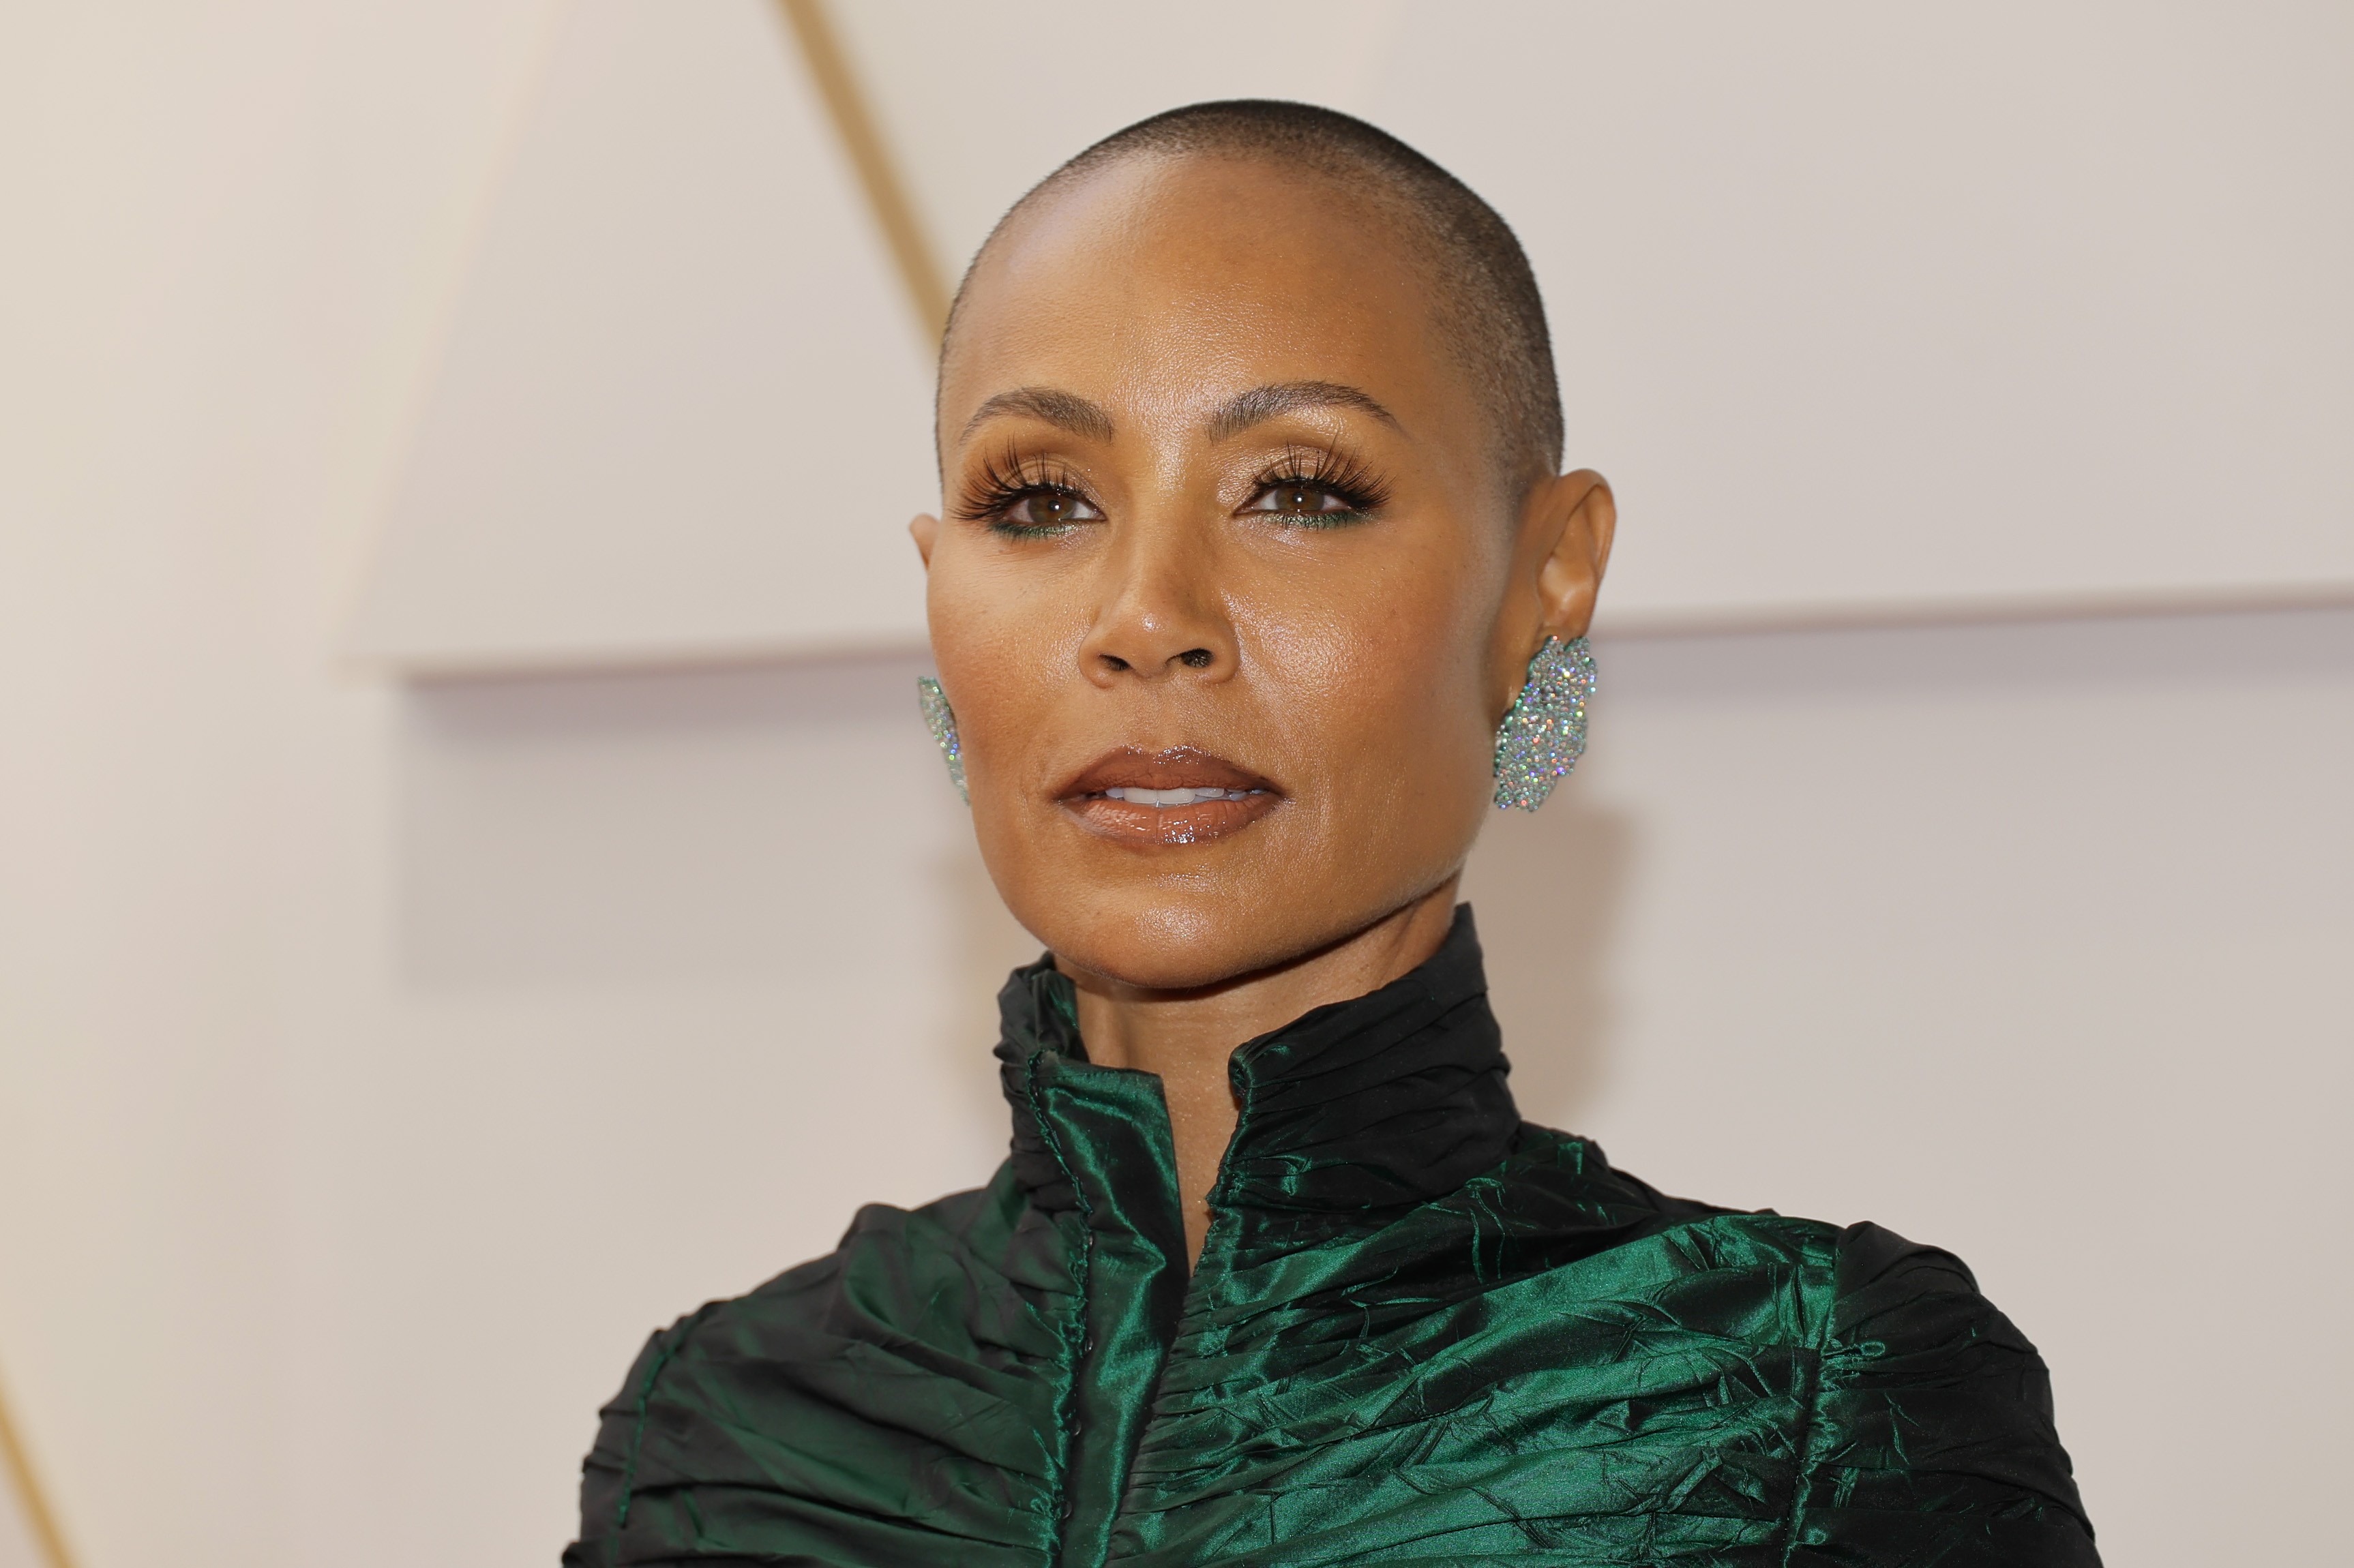 HOLLYWOOD, CALIFORNIA - MARCH 27: Jada Pinkett Smith attends the 94th Annual Academy Awards at Hollywood and Highland on March 27, 2022 in Hollywood, California. (Photo by Mike Coppola/Getty Images) (Foto: Getty Images)